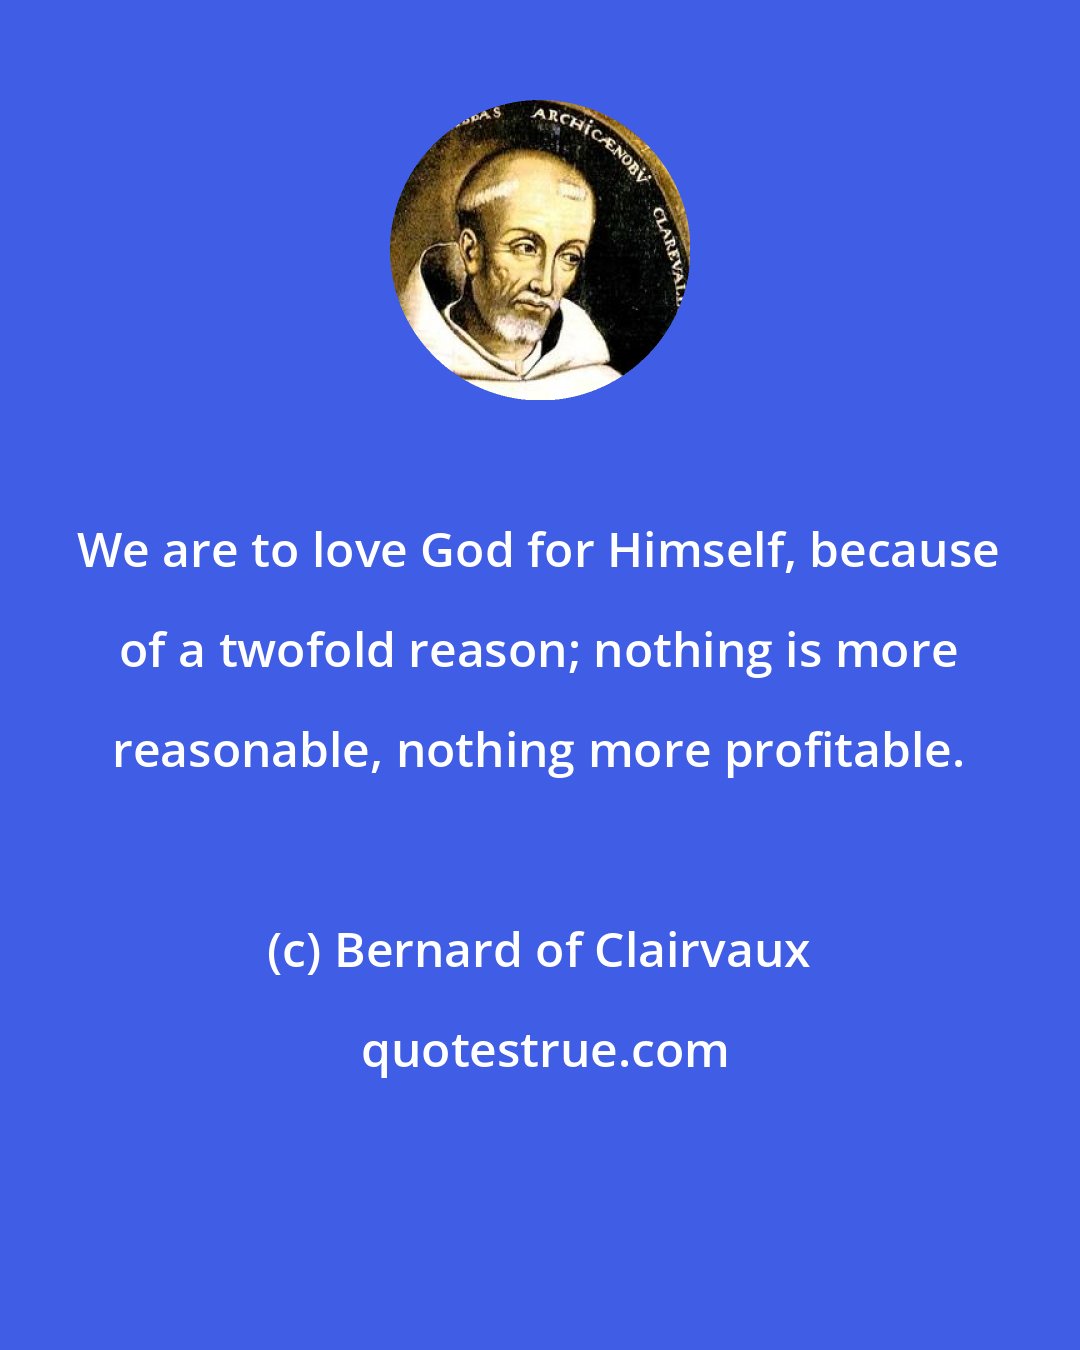 Bernard of Clairvaux: We are to love God for Himself, because of a twofold reason; nothing is more reasonable, nothing more profitable.